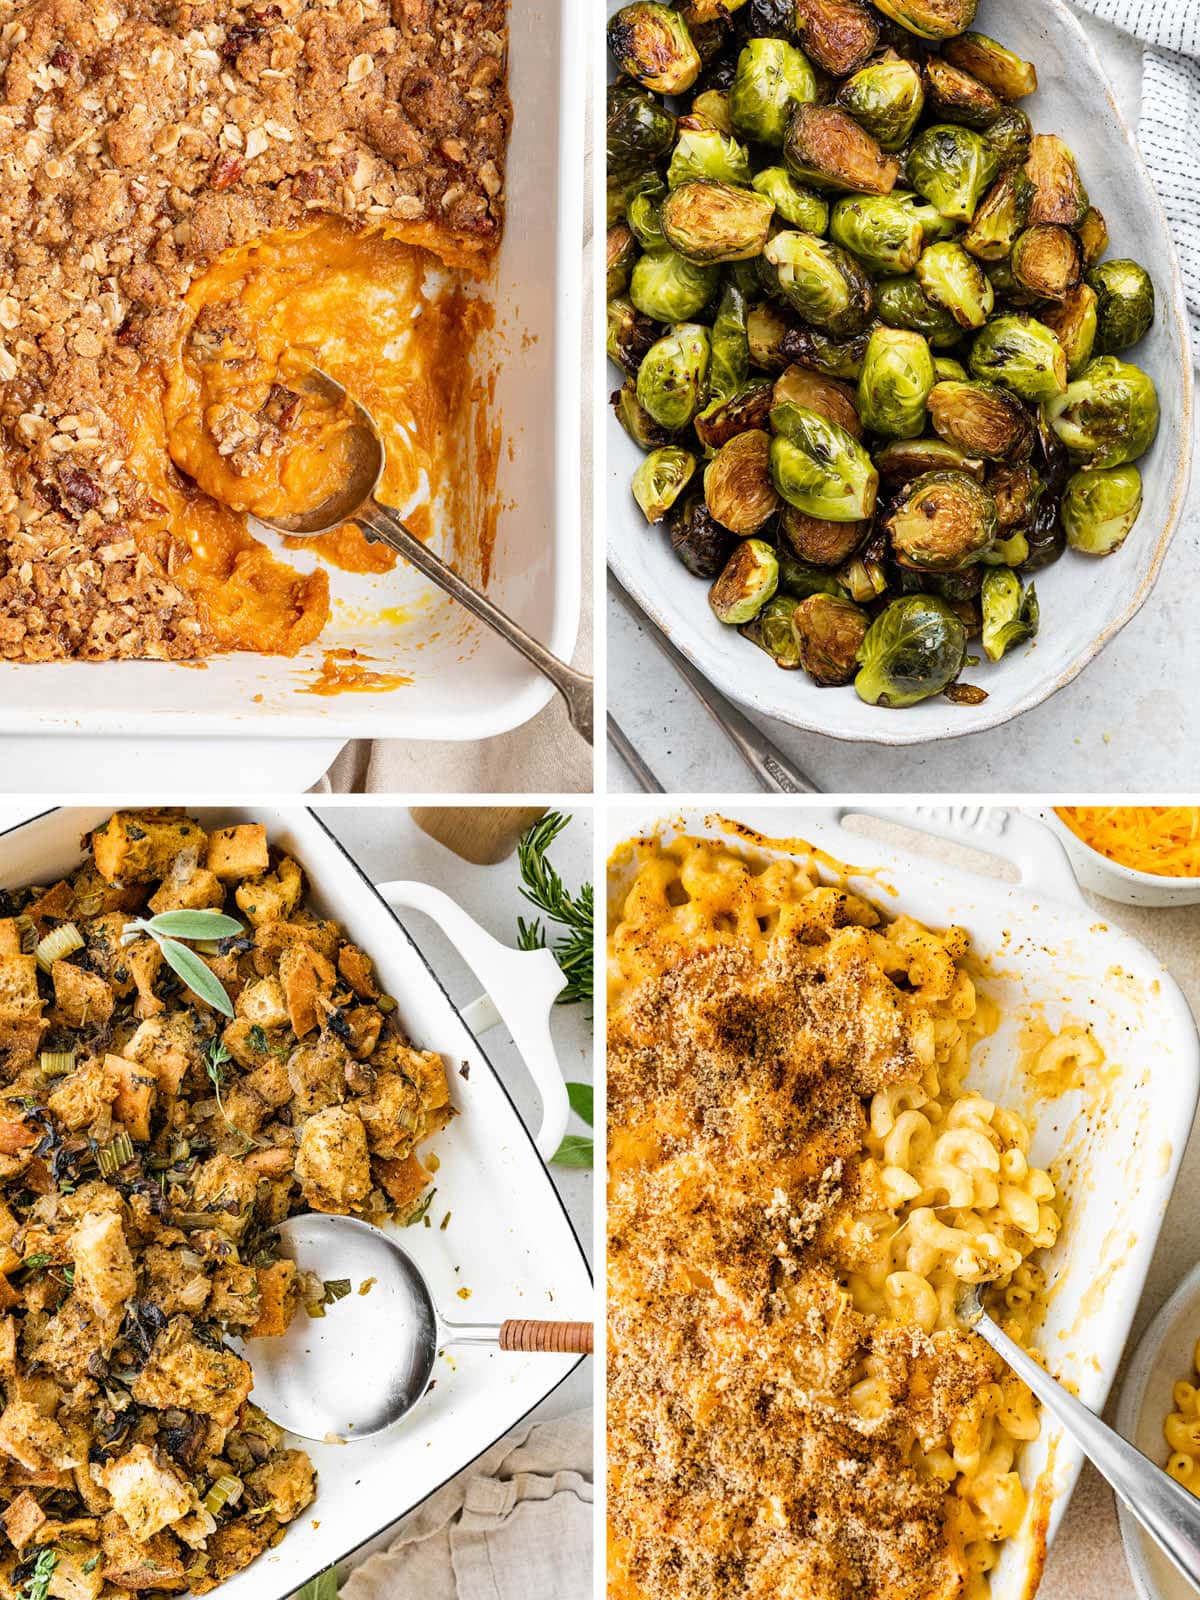 Collage of four photos: sweet potato casserole, roasted brussels sprouts, stuffing and baked mac and cheese.